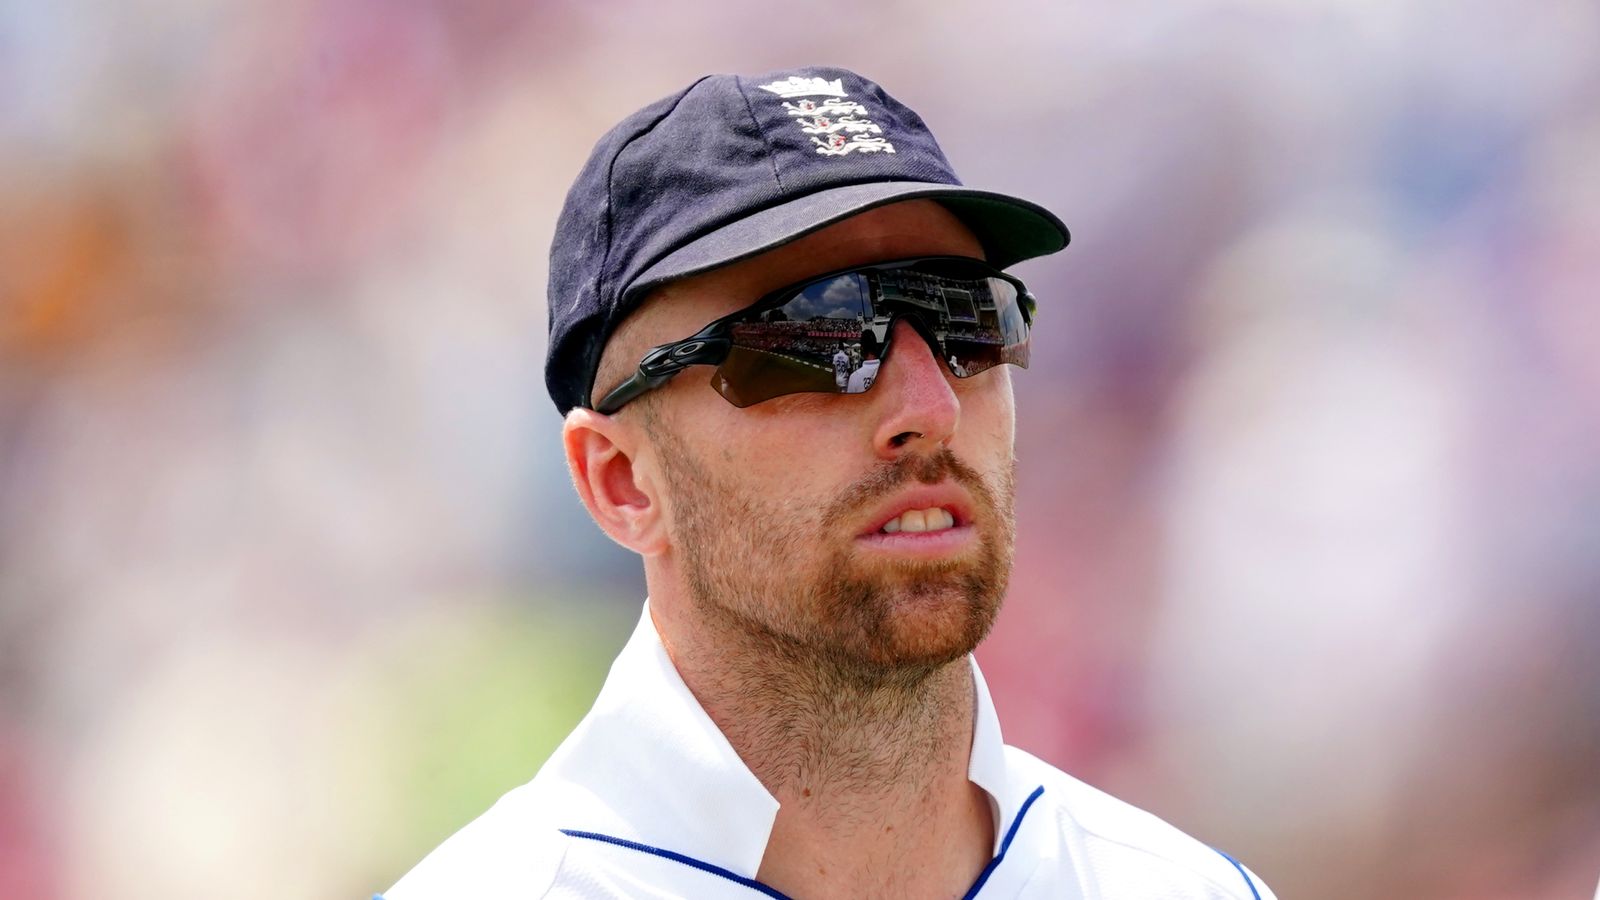 The Ashes: Stuart Broad 'gutted' for Jack Leach; Moeen Ali return 'hypothetical'